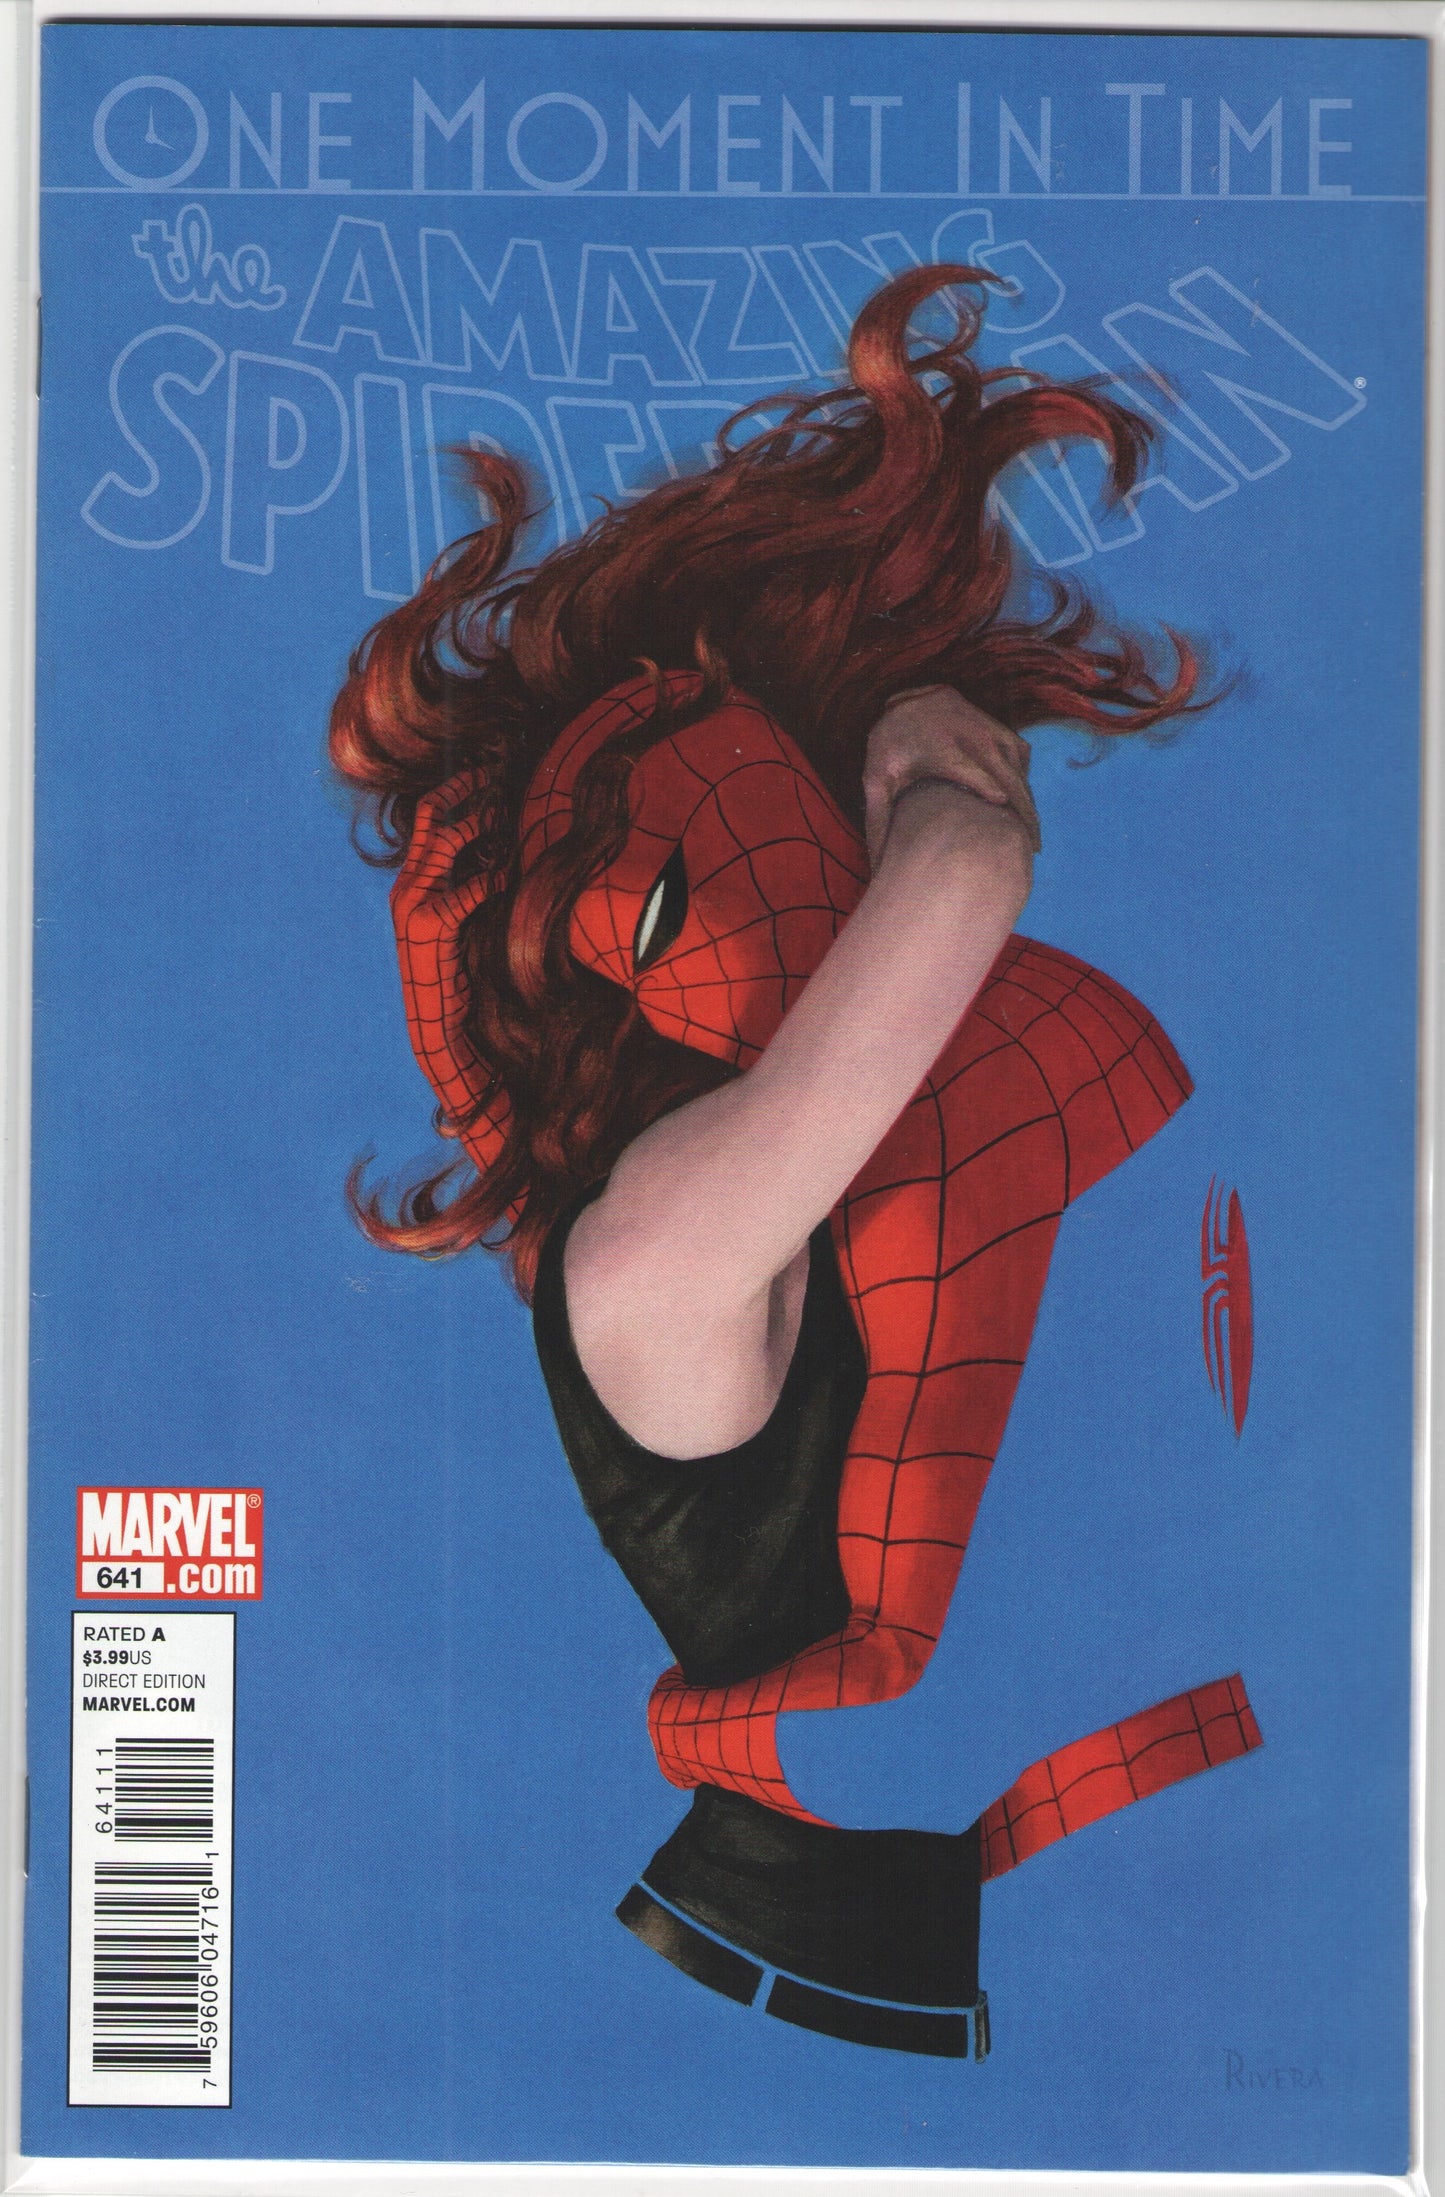 Amazing Spider-Man "One Moment in Time" Complete Story Arc #638-641 (2010)